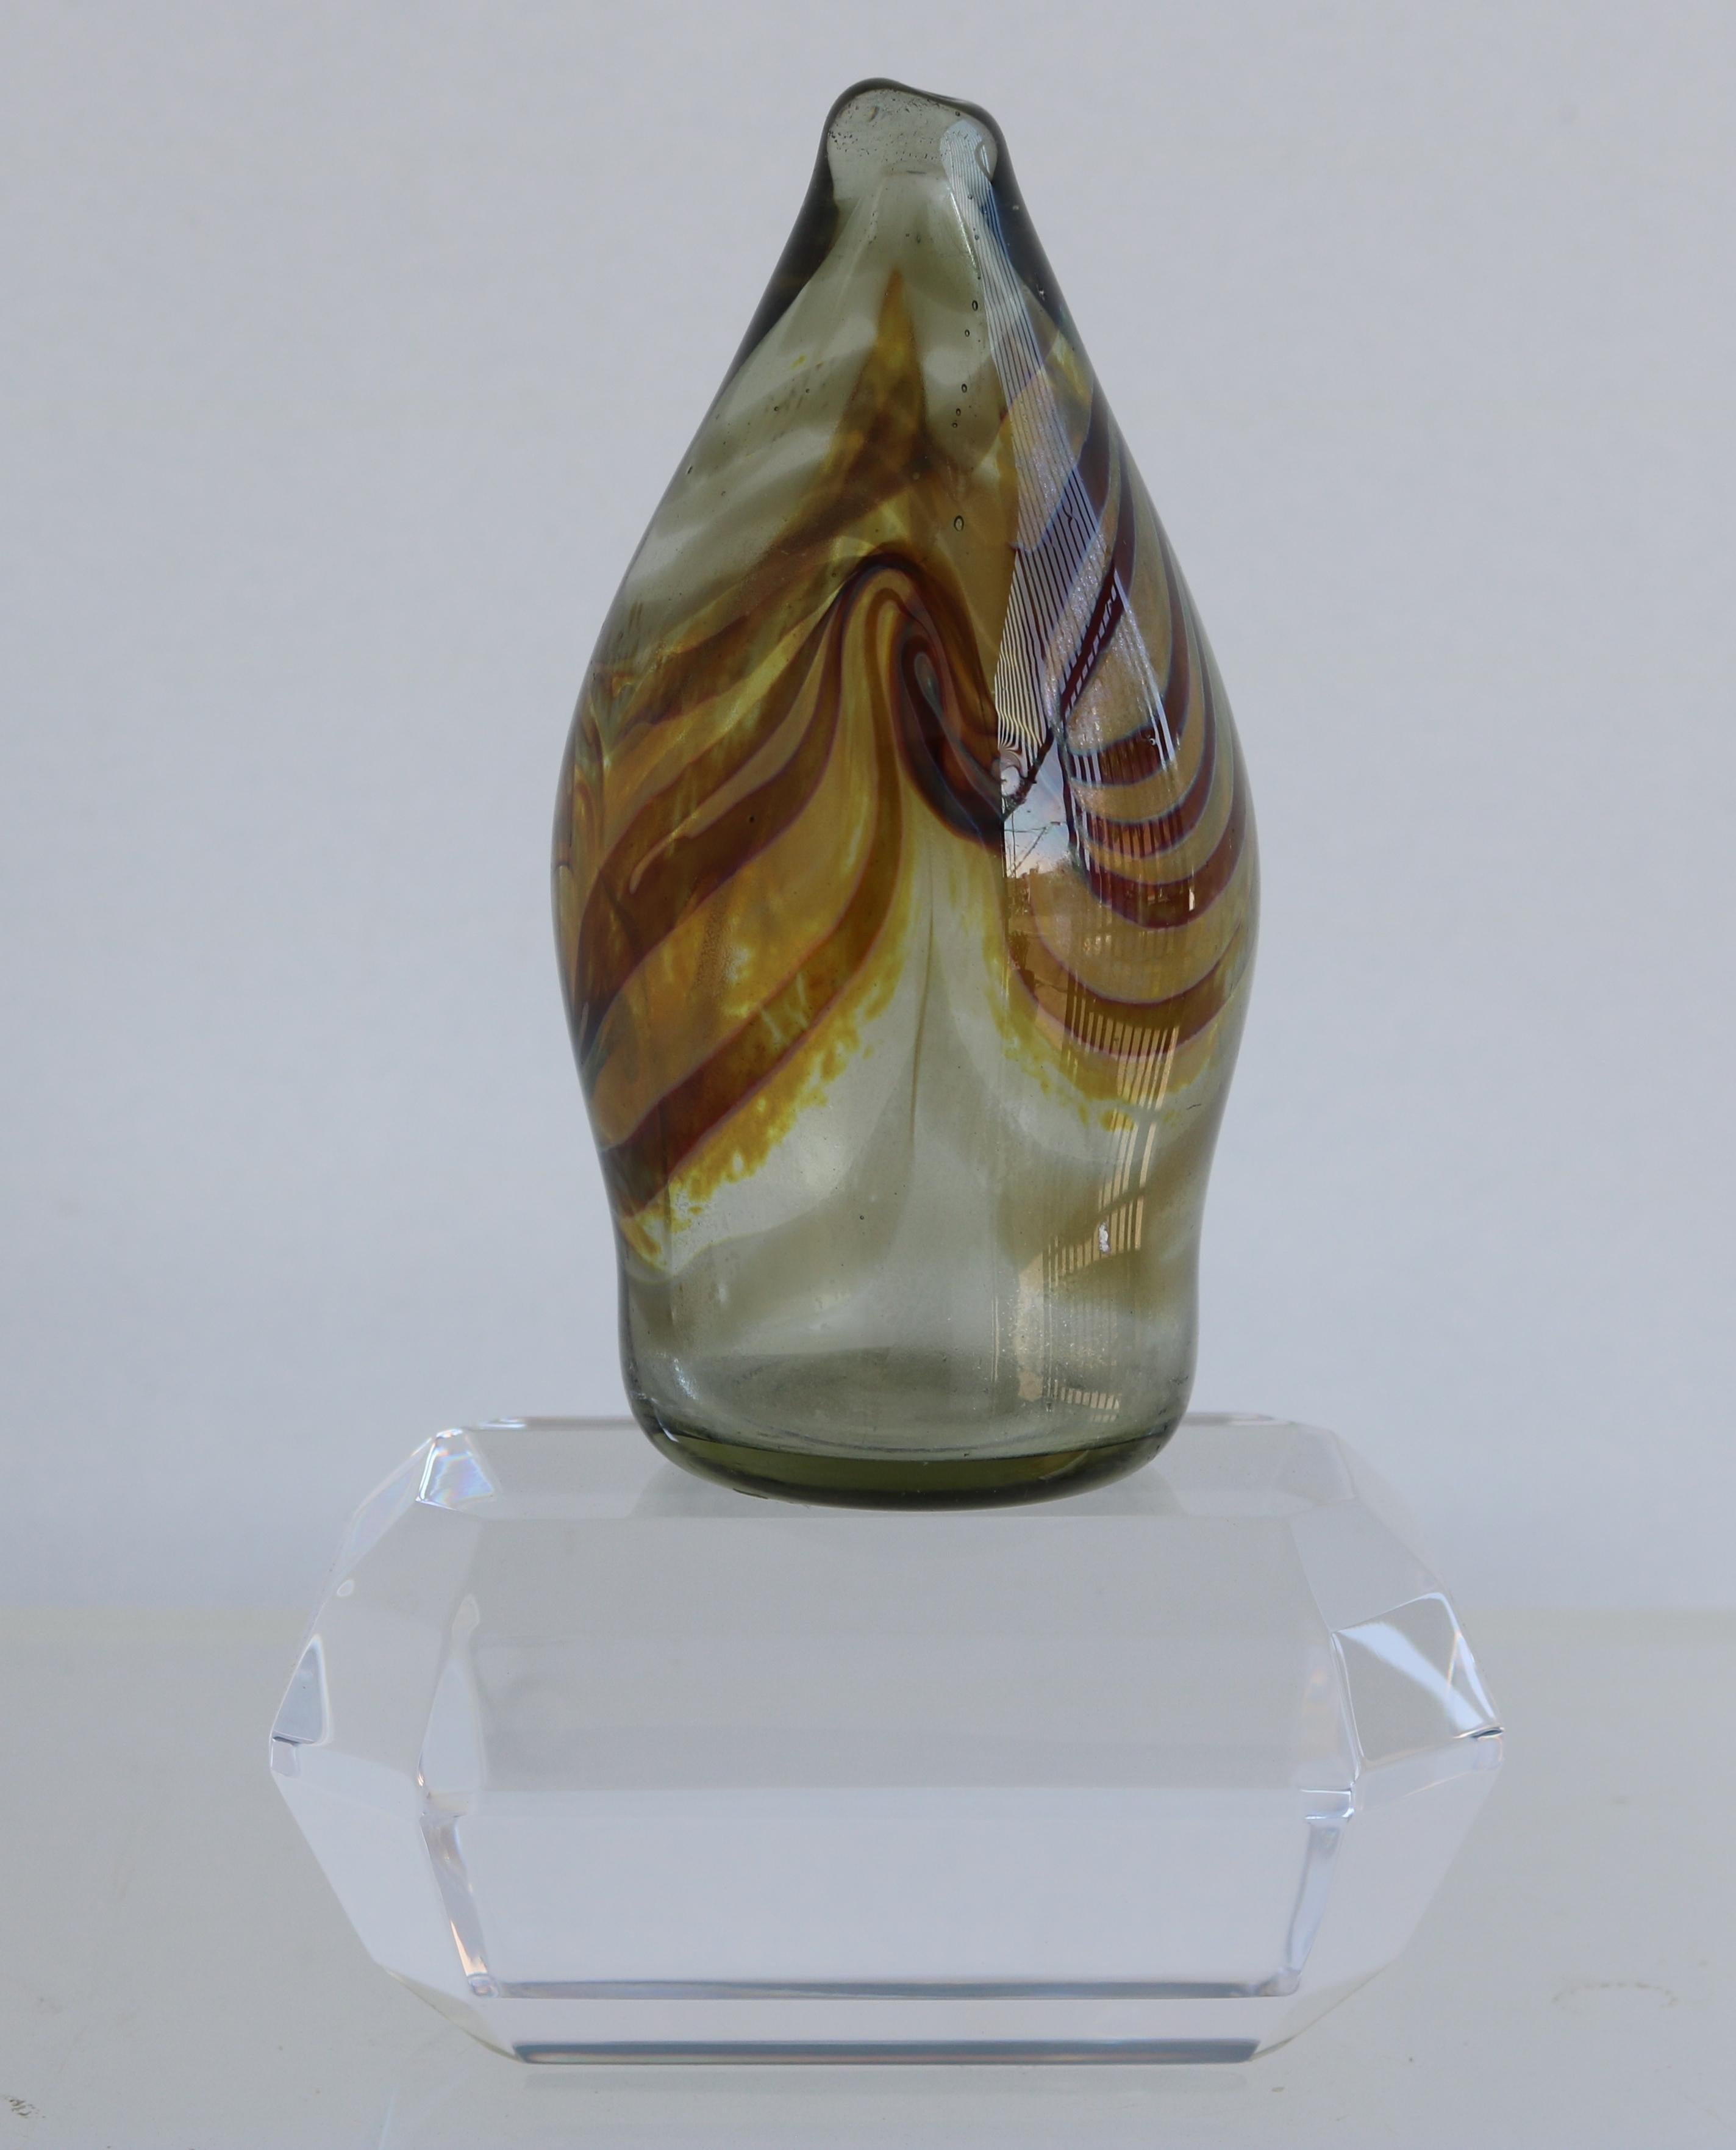 This one-of-a-kind handblown glass piece features yellow caramel-colored stripes on a clear form. The piece is shaped like a vase, yet the top has no opening. Displayed on a Lucite stand.
The dimensions with of the glass sculpture without the base